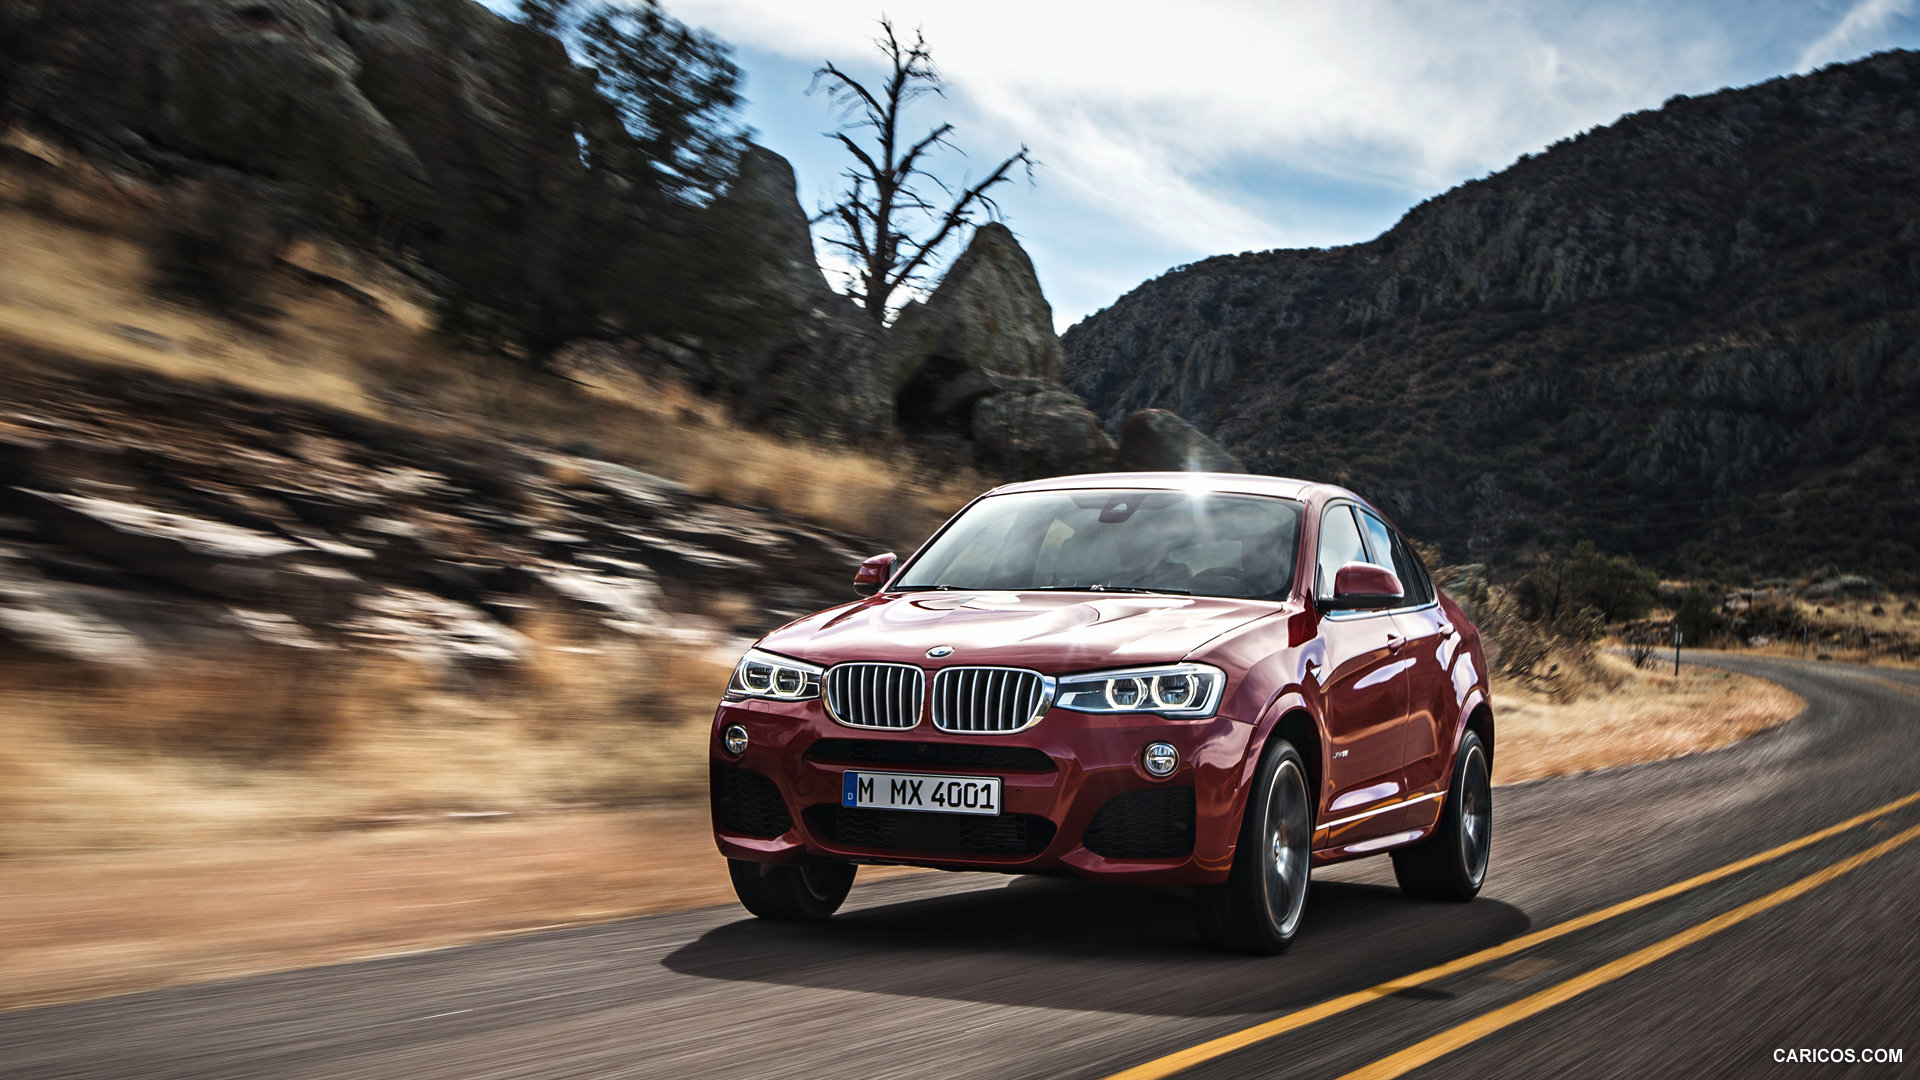 Best BMW X4 wallpaper ID:398206 for High Resolution hd 1080p PC